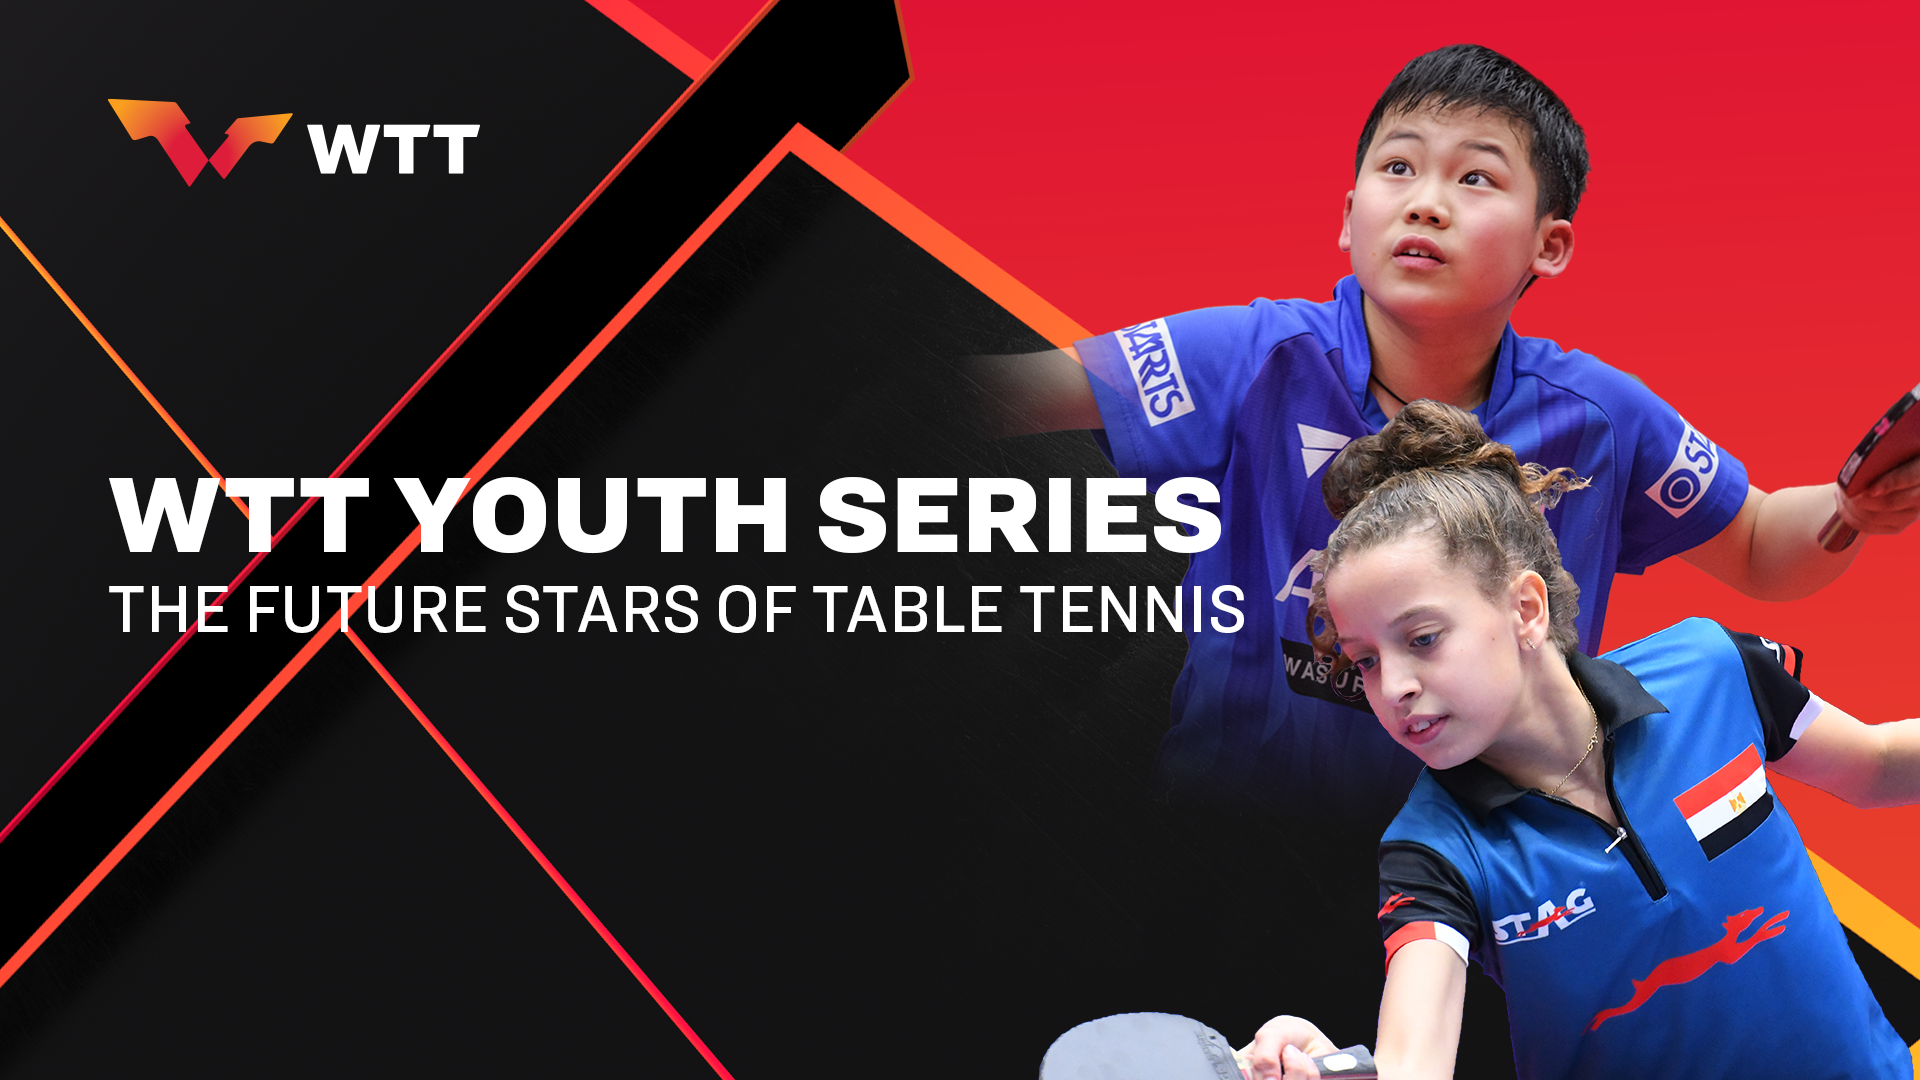 World Table Tennis, the sport's commercial arm, has re-shaped junior competition, with the inaugural World Youth Championships starting in Portugal tomorrow ©WTT